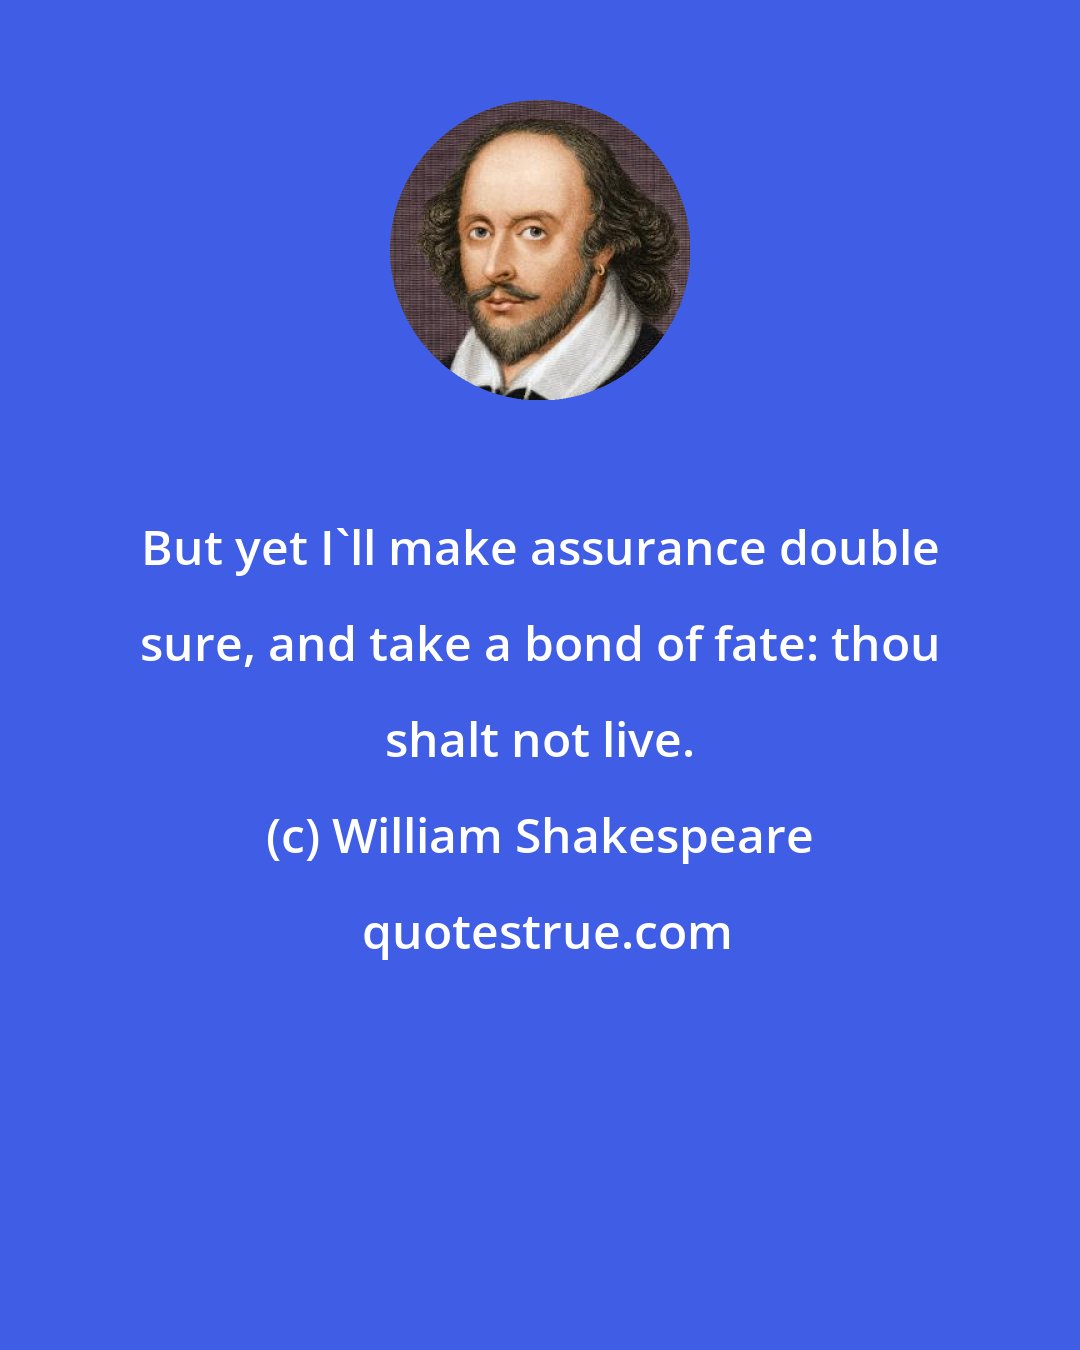 William Shakespeare: But yet I'll make assurance double sure, and take a bond of fate: thou shalt not live.